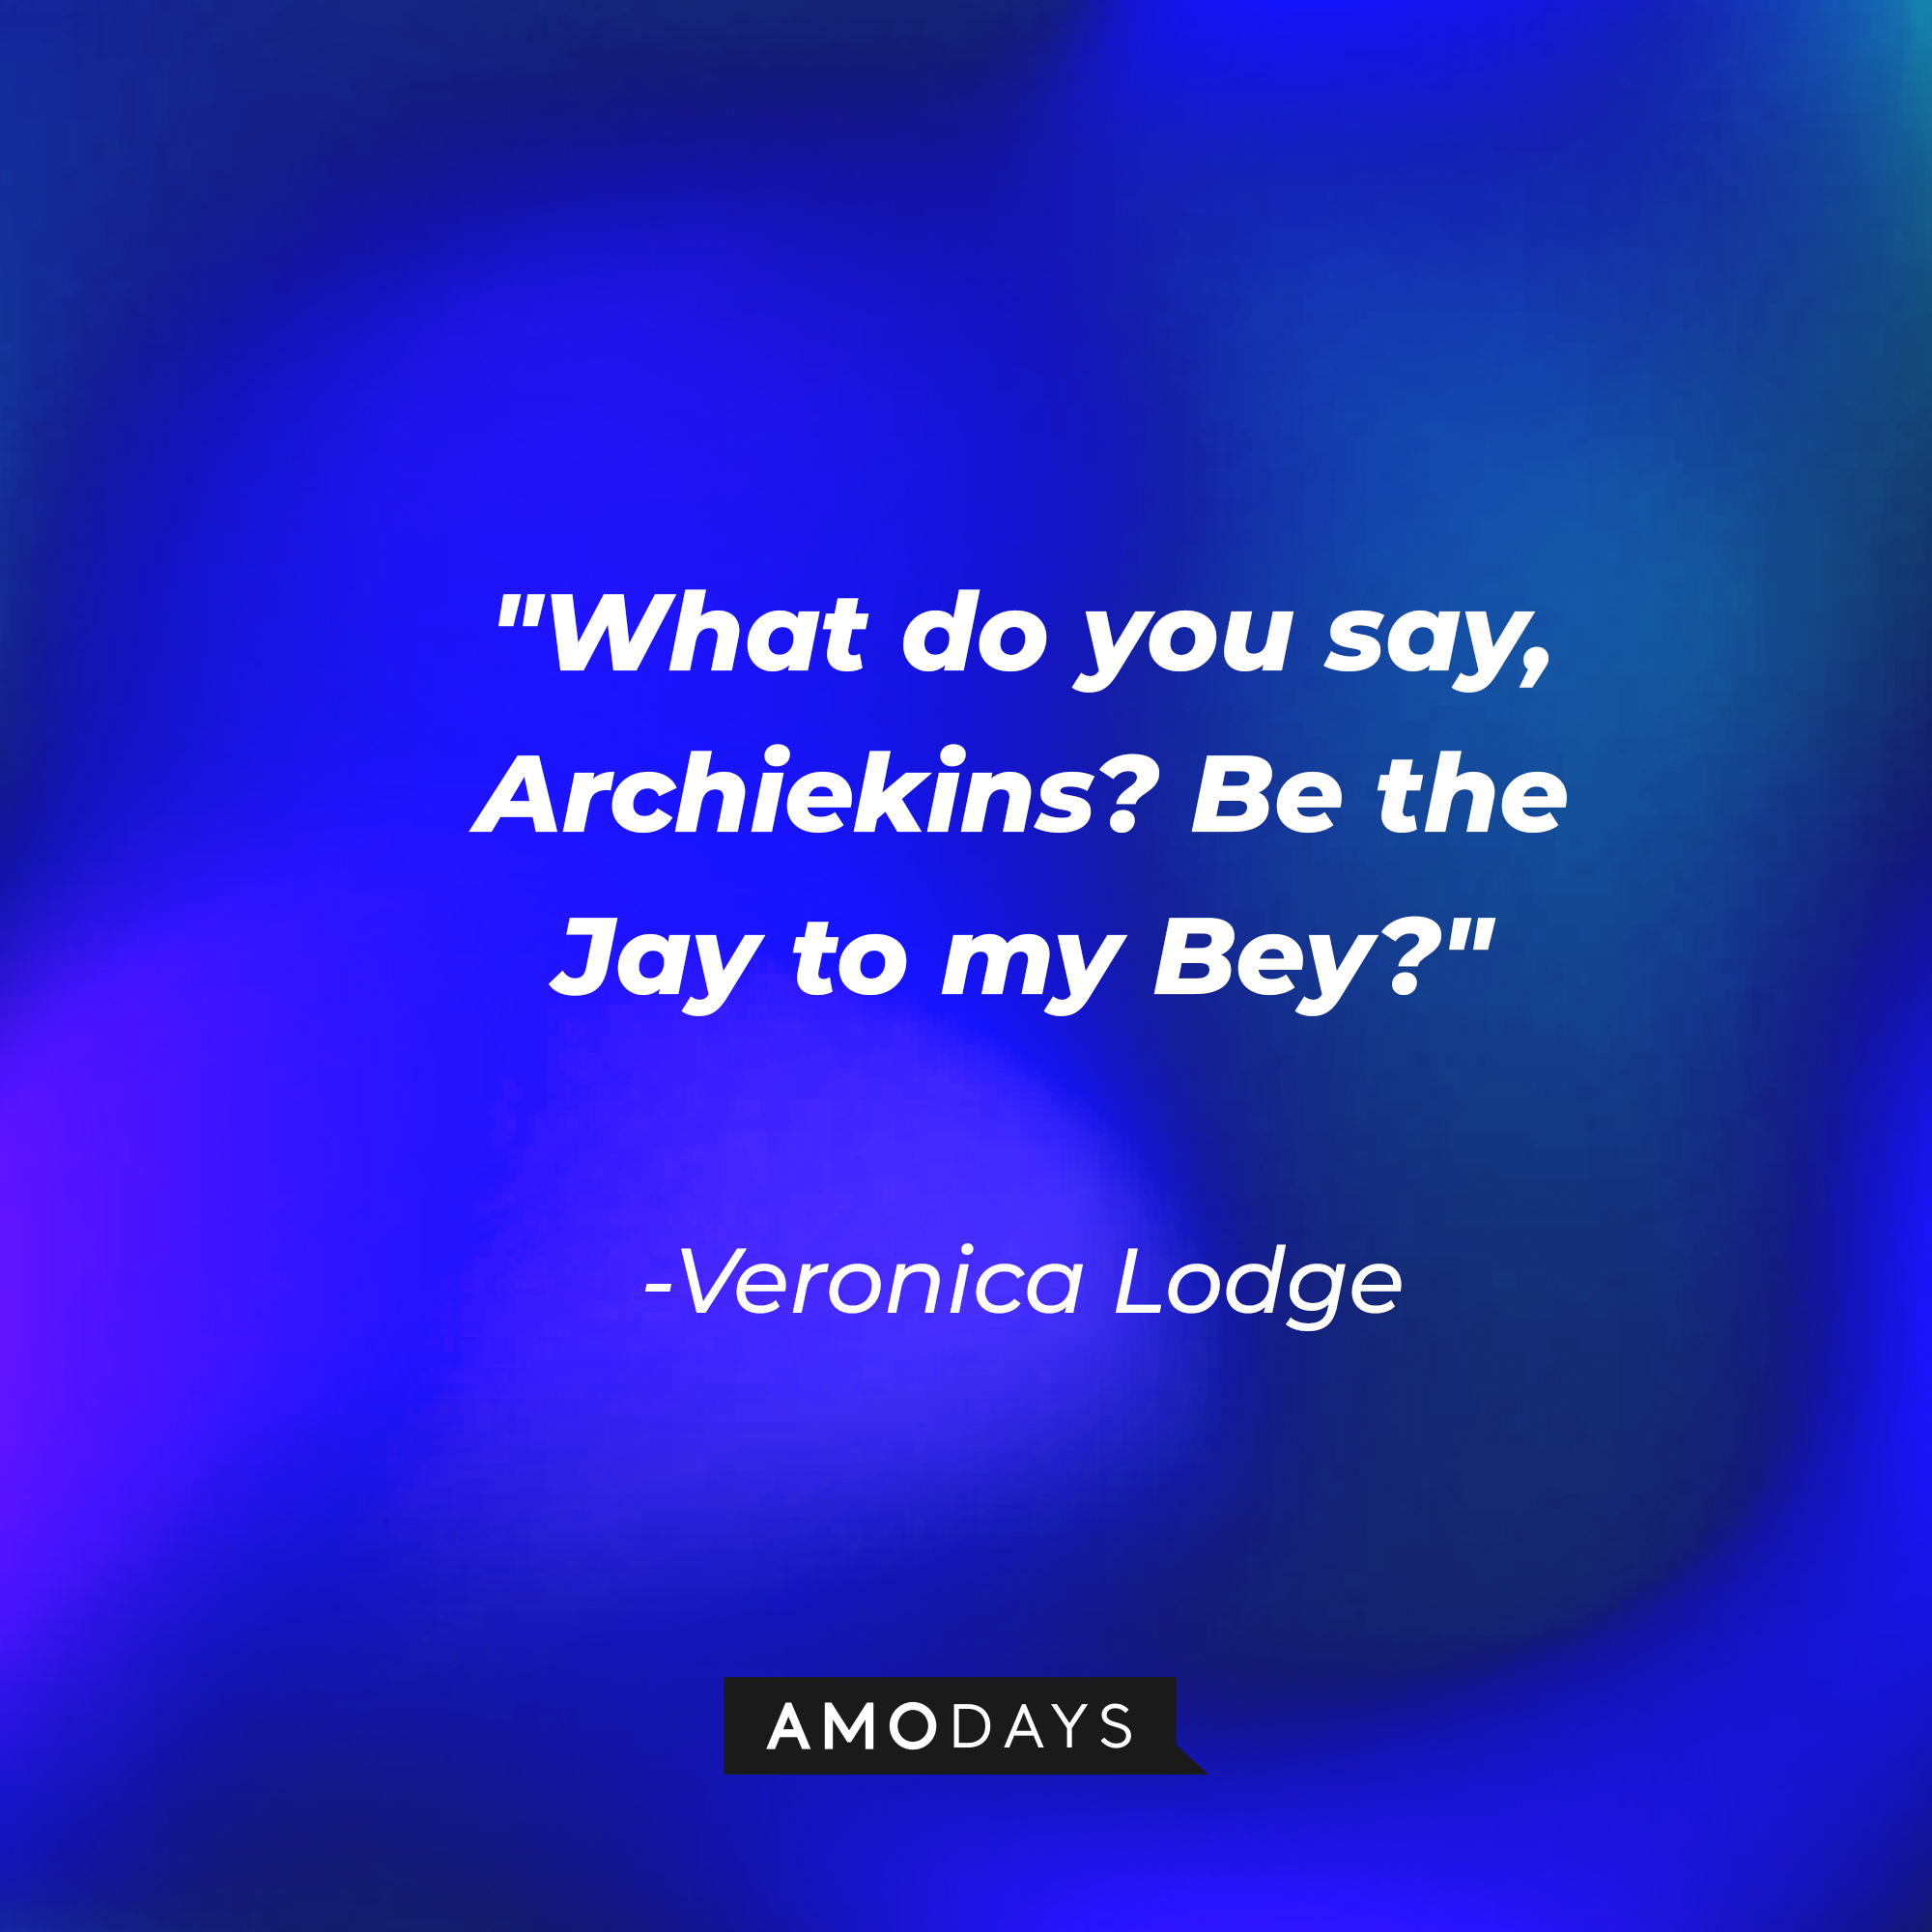 Veronica Lodge's quote: "What do you say, Archiekins? Be the Jay to my Bey?" | Source: AmoDays